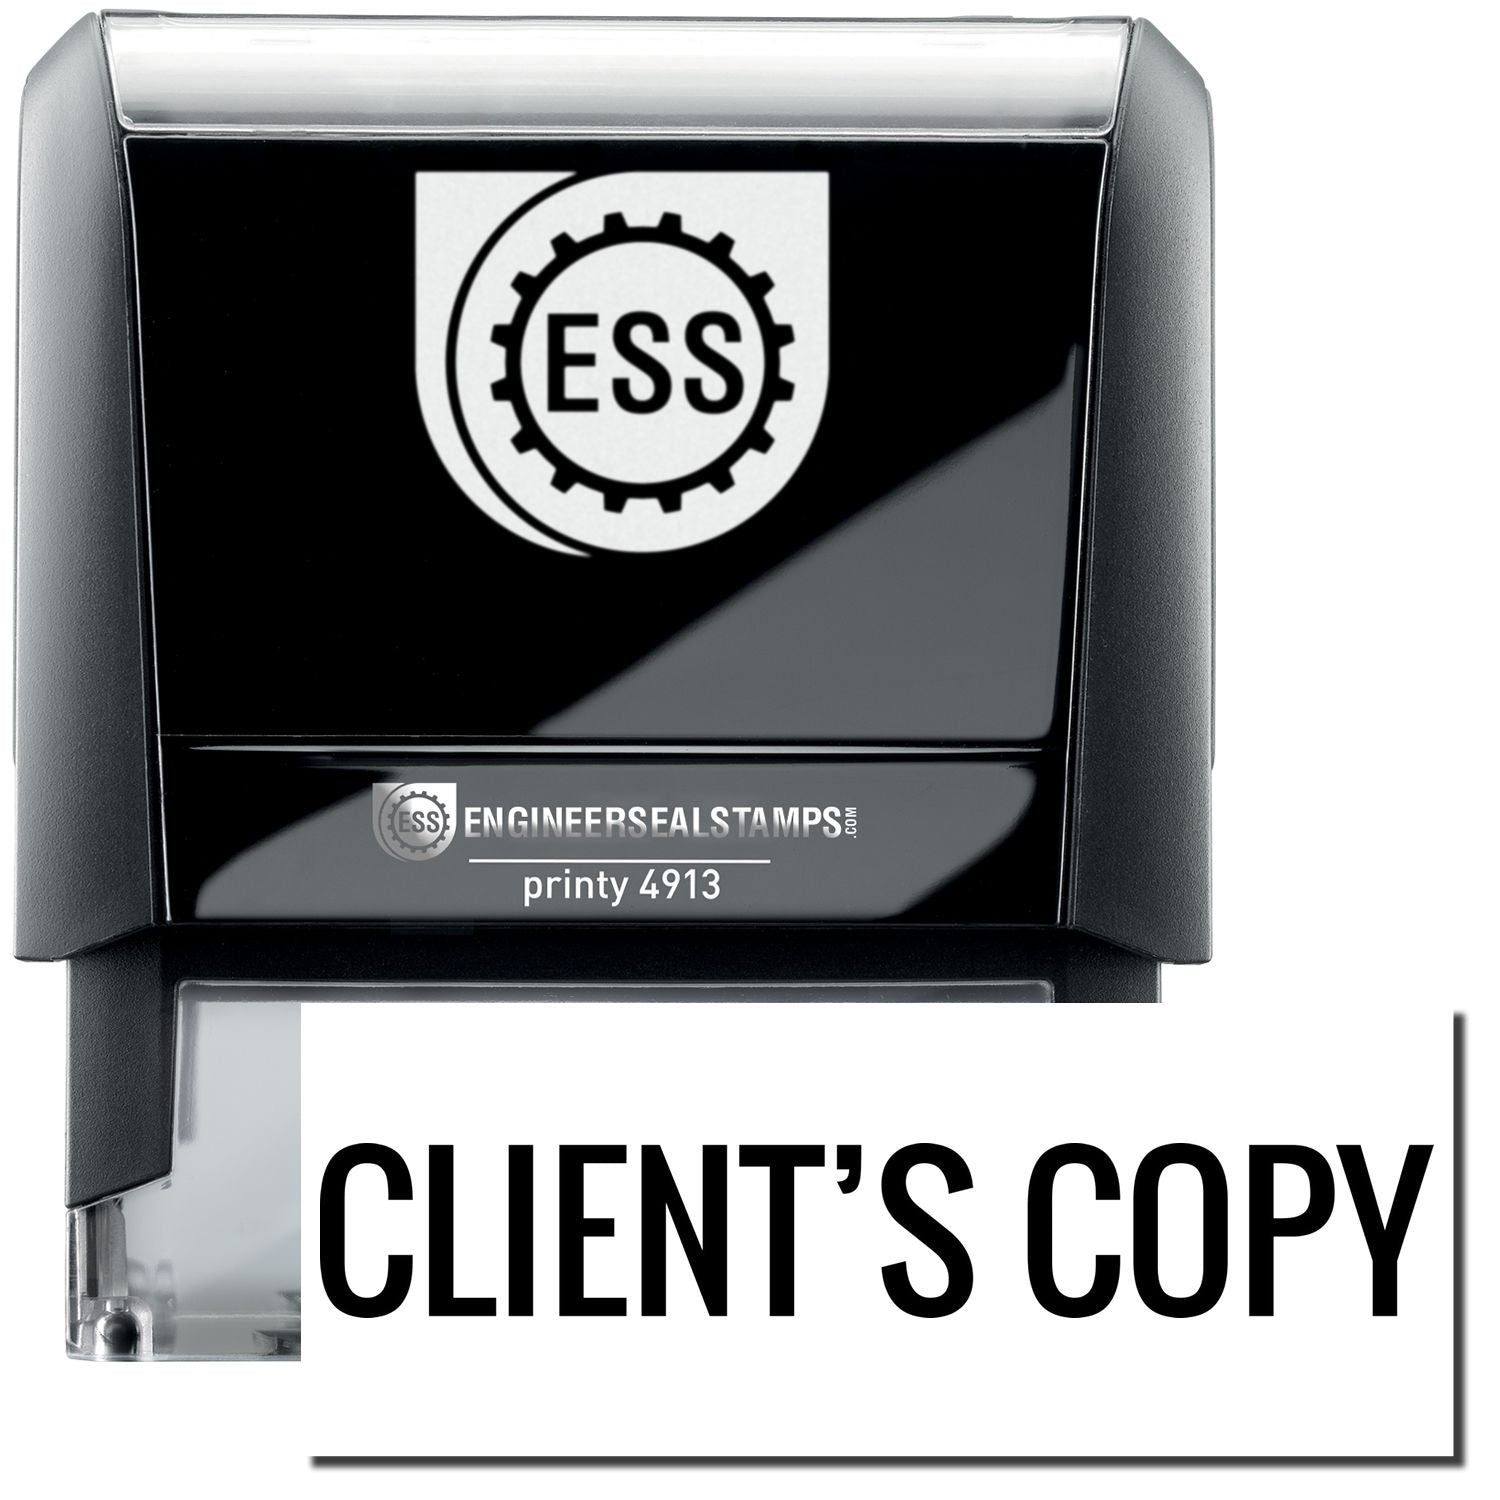 A self-inking stamp with a stamped image showing how the text "CLIENT'S COPY" in a large font is displayed by it after stamping.